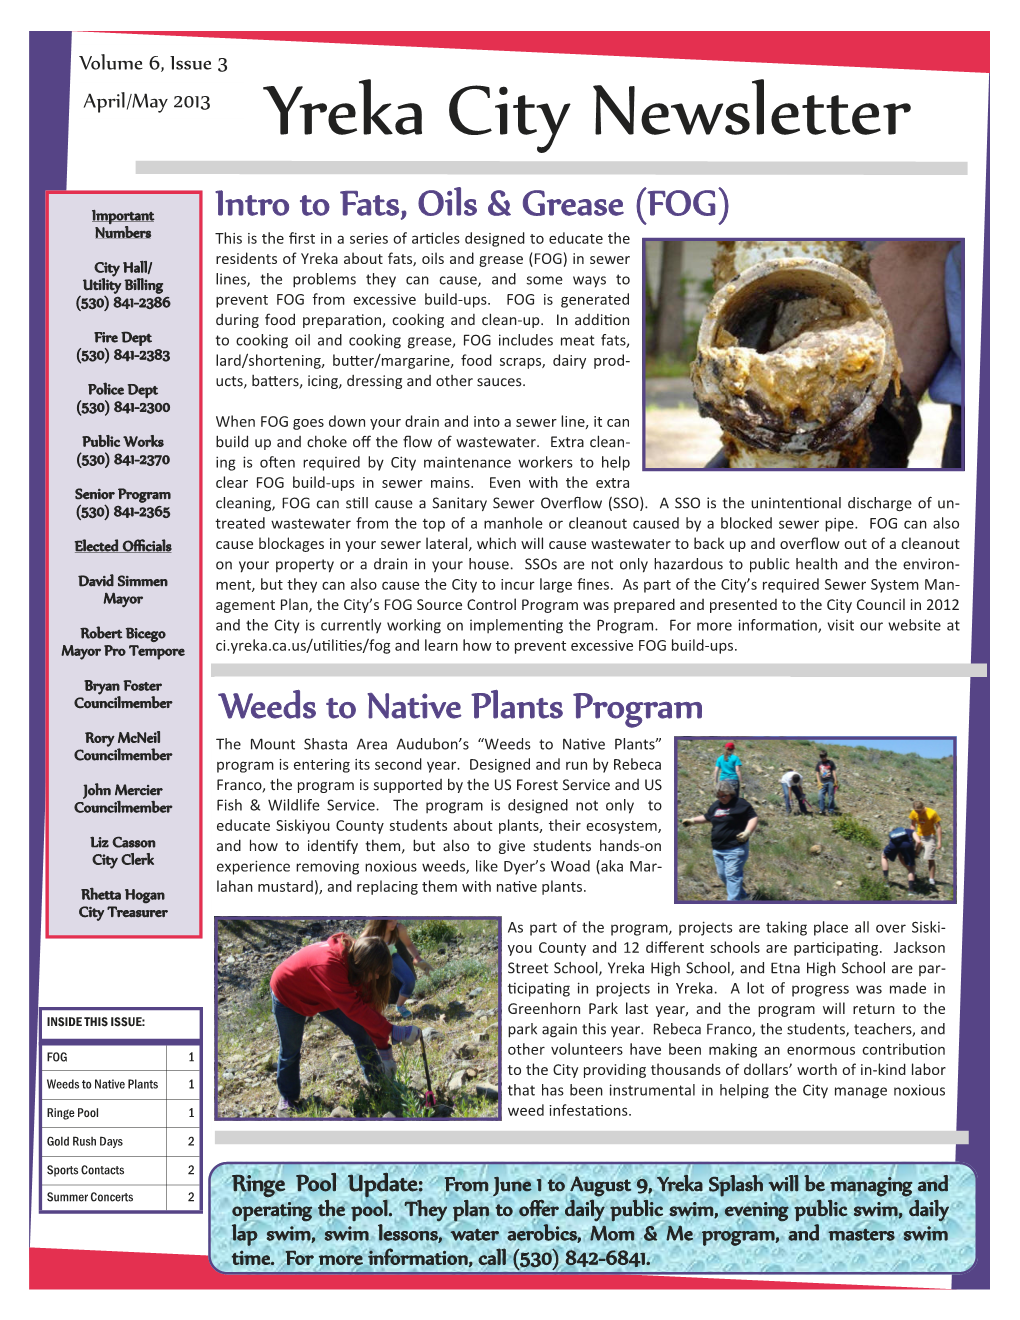 April and May 2013 Newsletter